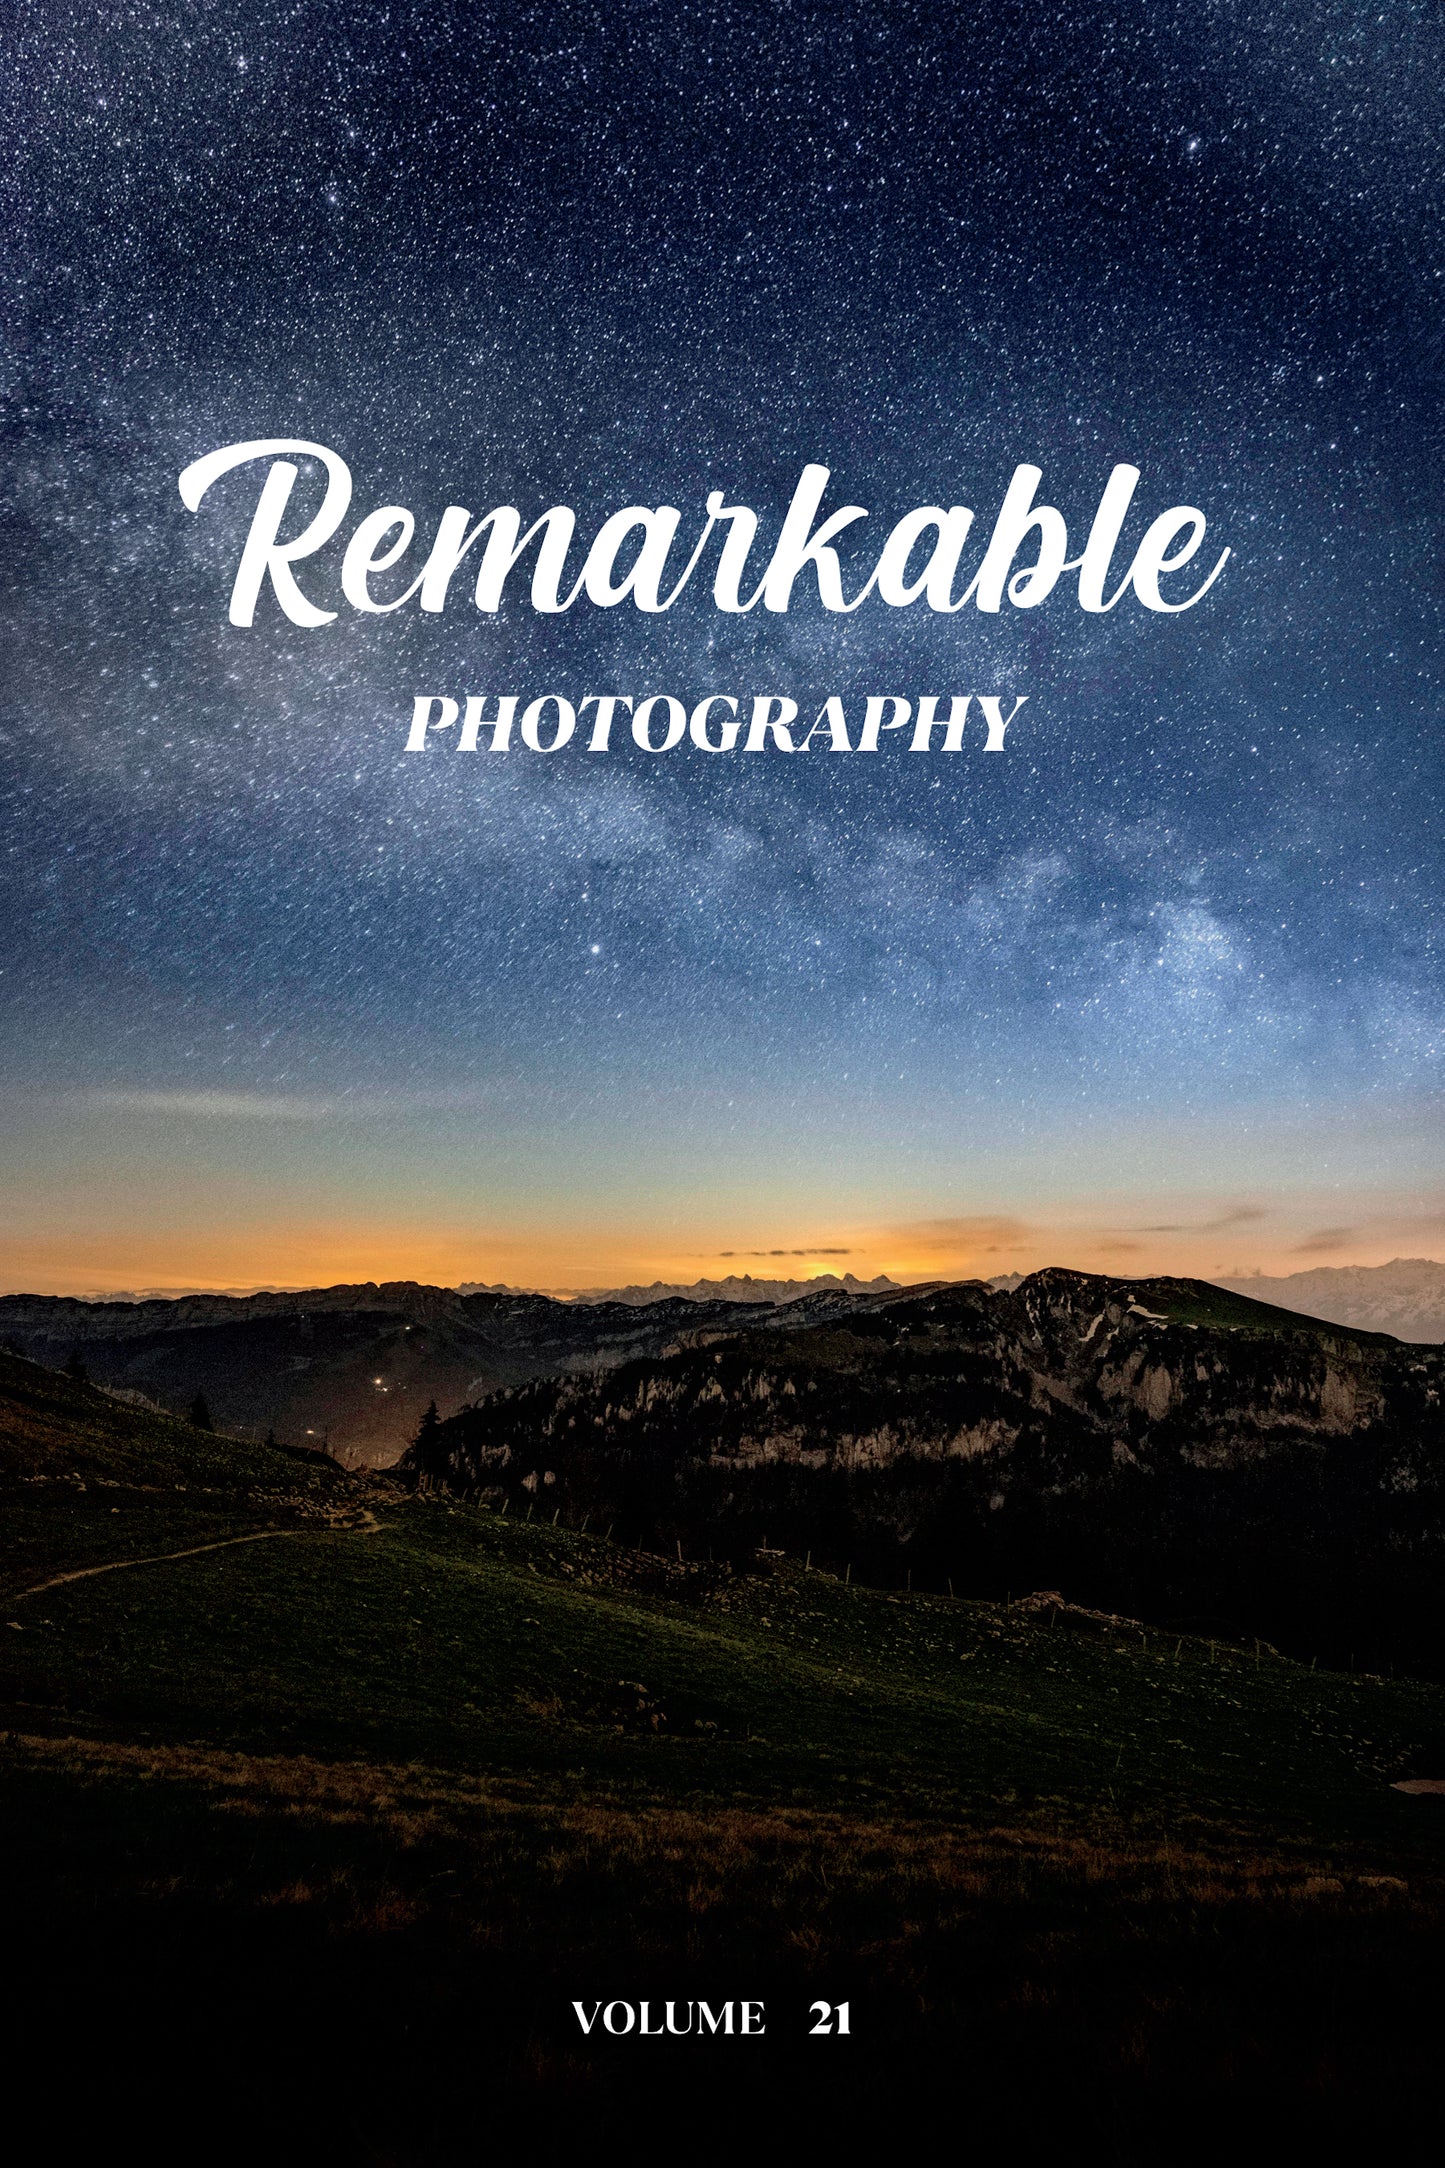 Remarkable Photography Volume 21 (Physical Book Pre-Order)